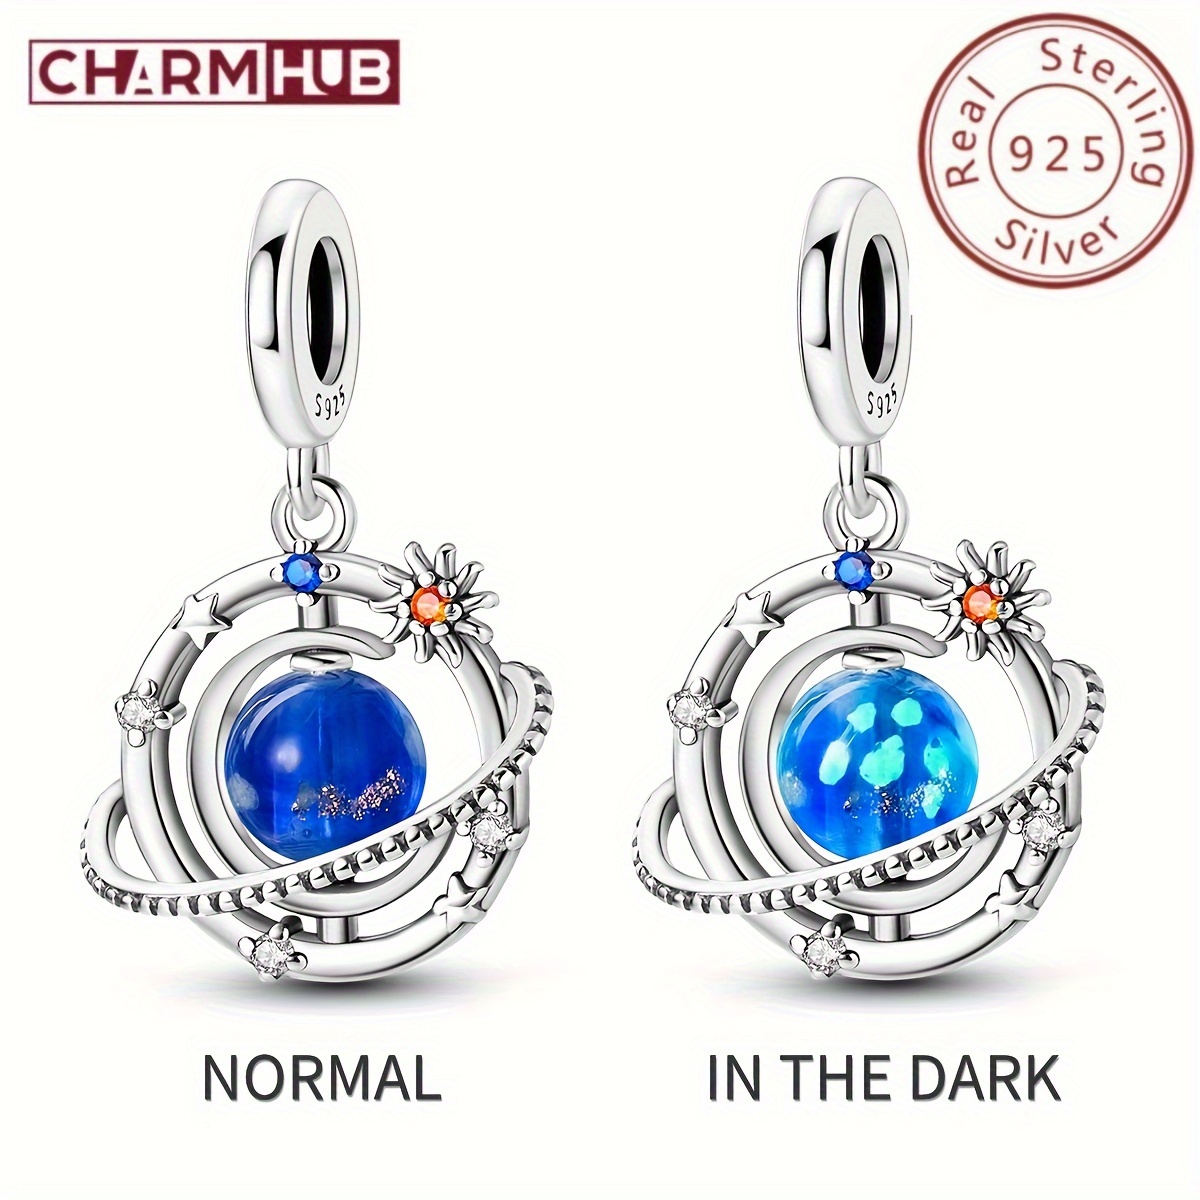 

Charmhub 100% 925 Sterling Silver Blue Luminous Glass Planet Planetary Universe Star Sun Pendant Charm Fit Original Bracelet Necklace Beads For Diy Jewelry Making Valentine's Day Gift For Girl